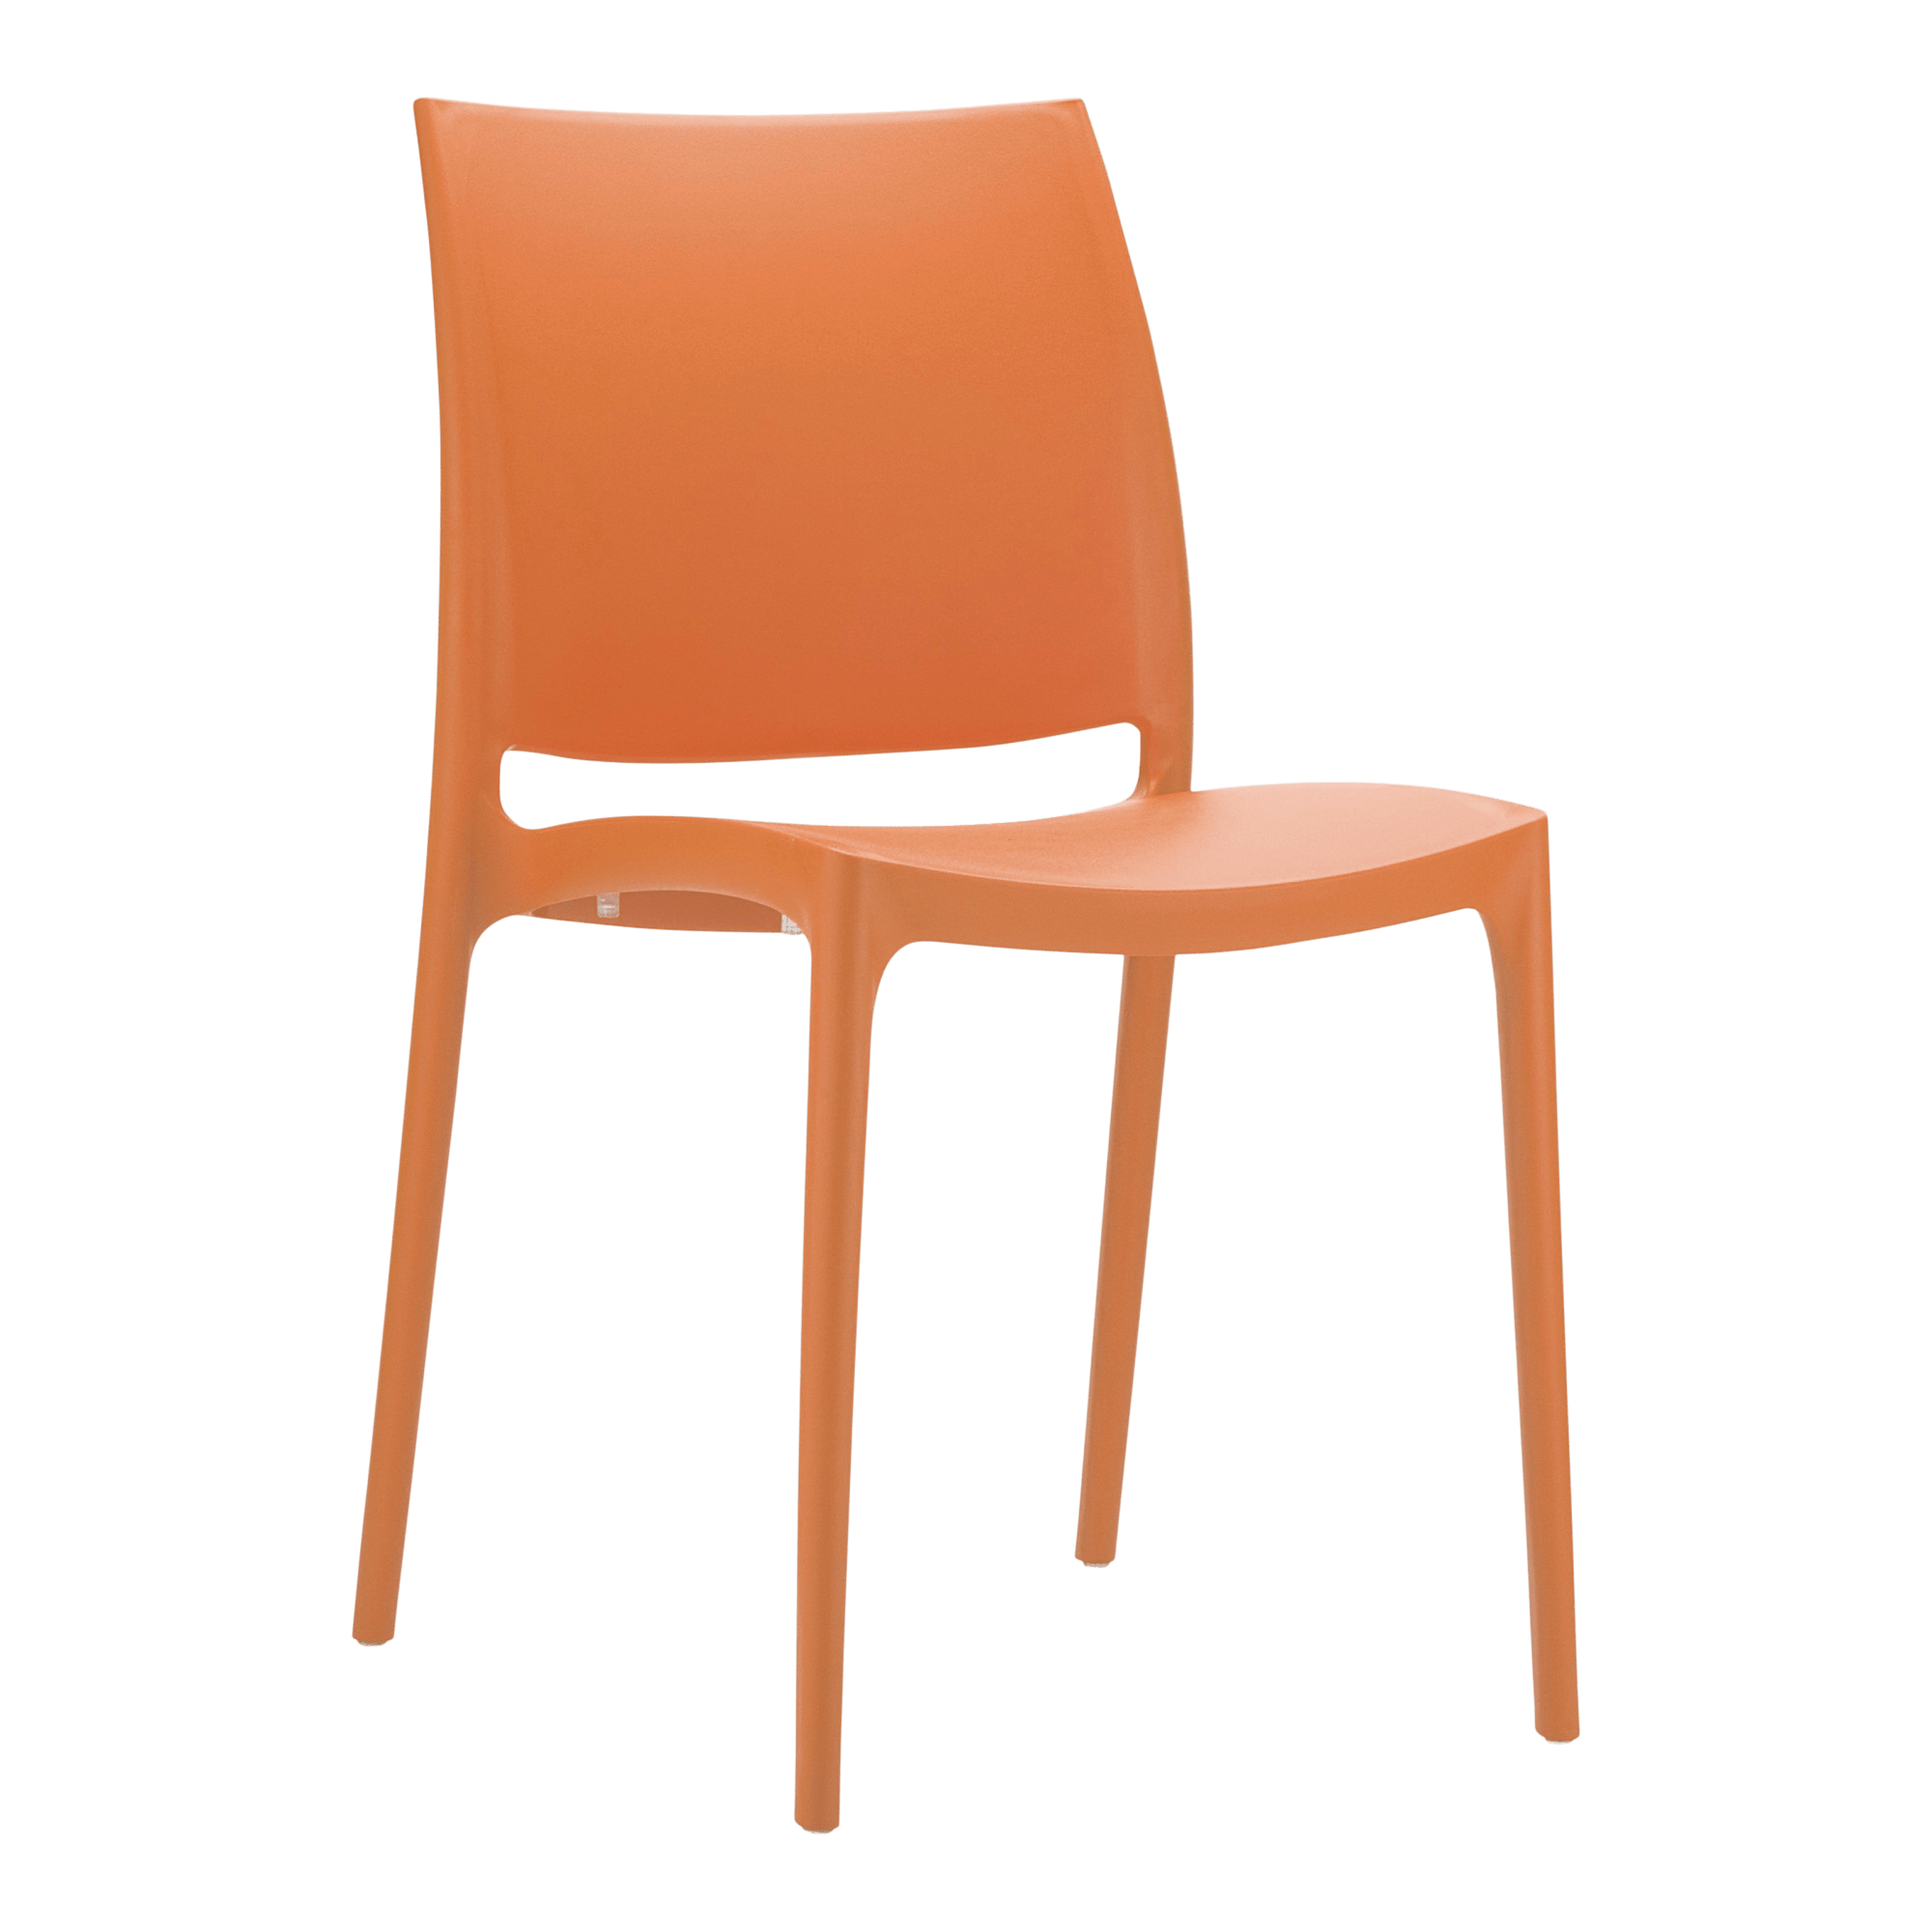 Kyra Commercial Outdoor Resin Chair